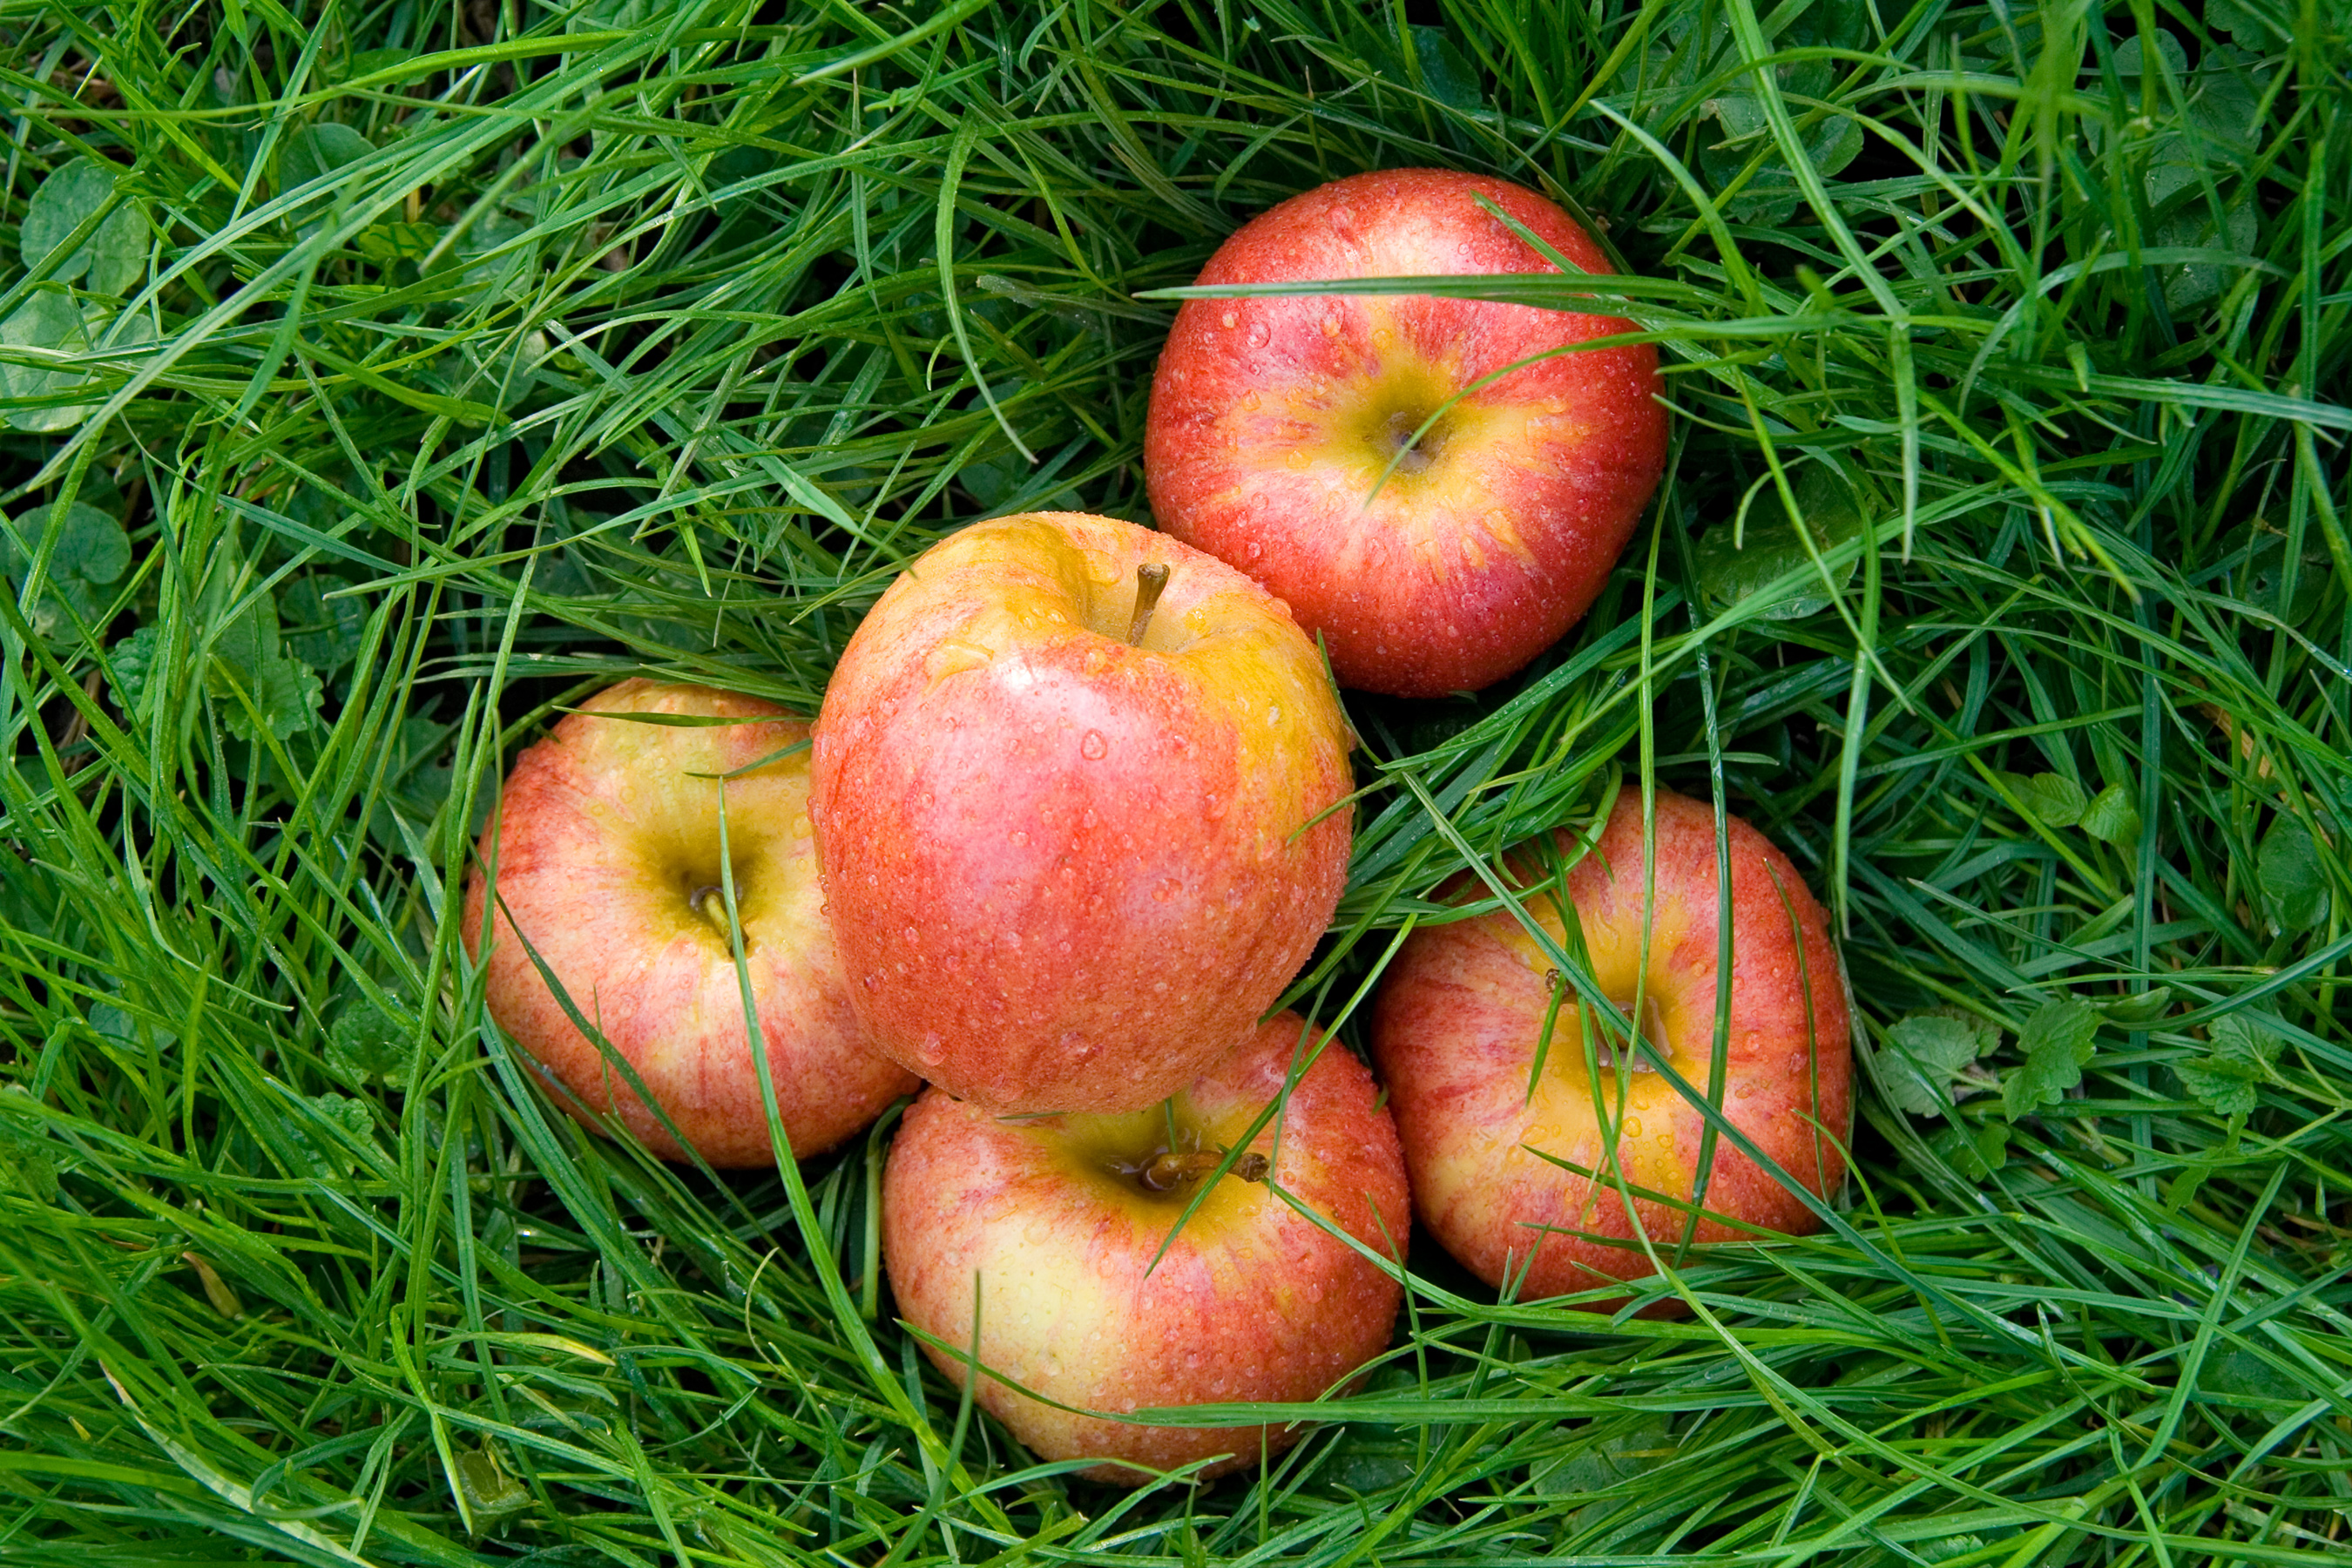 Rosy apples fell on the green grass